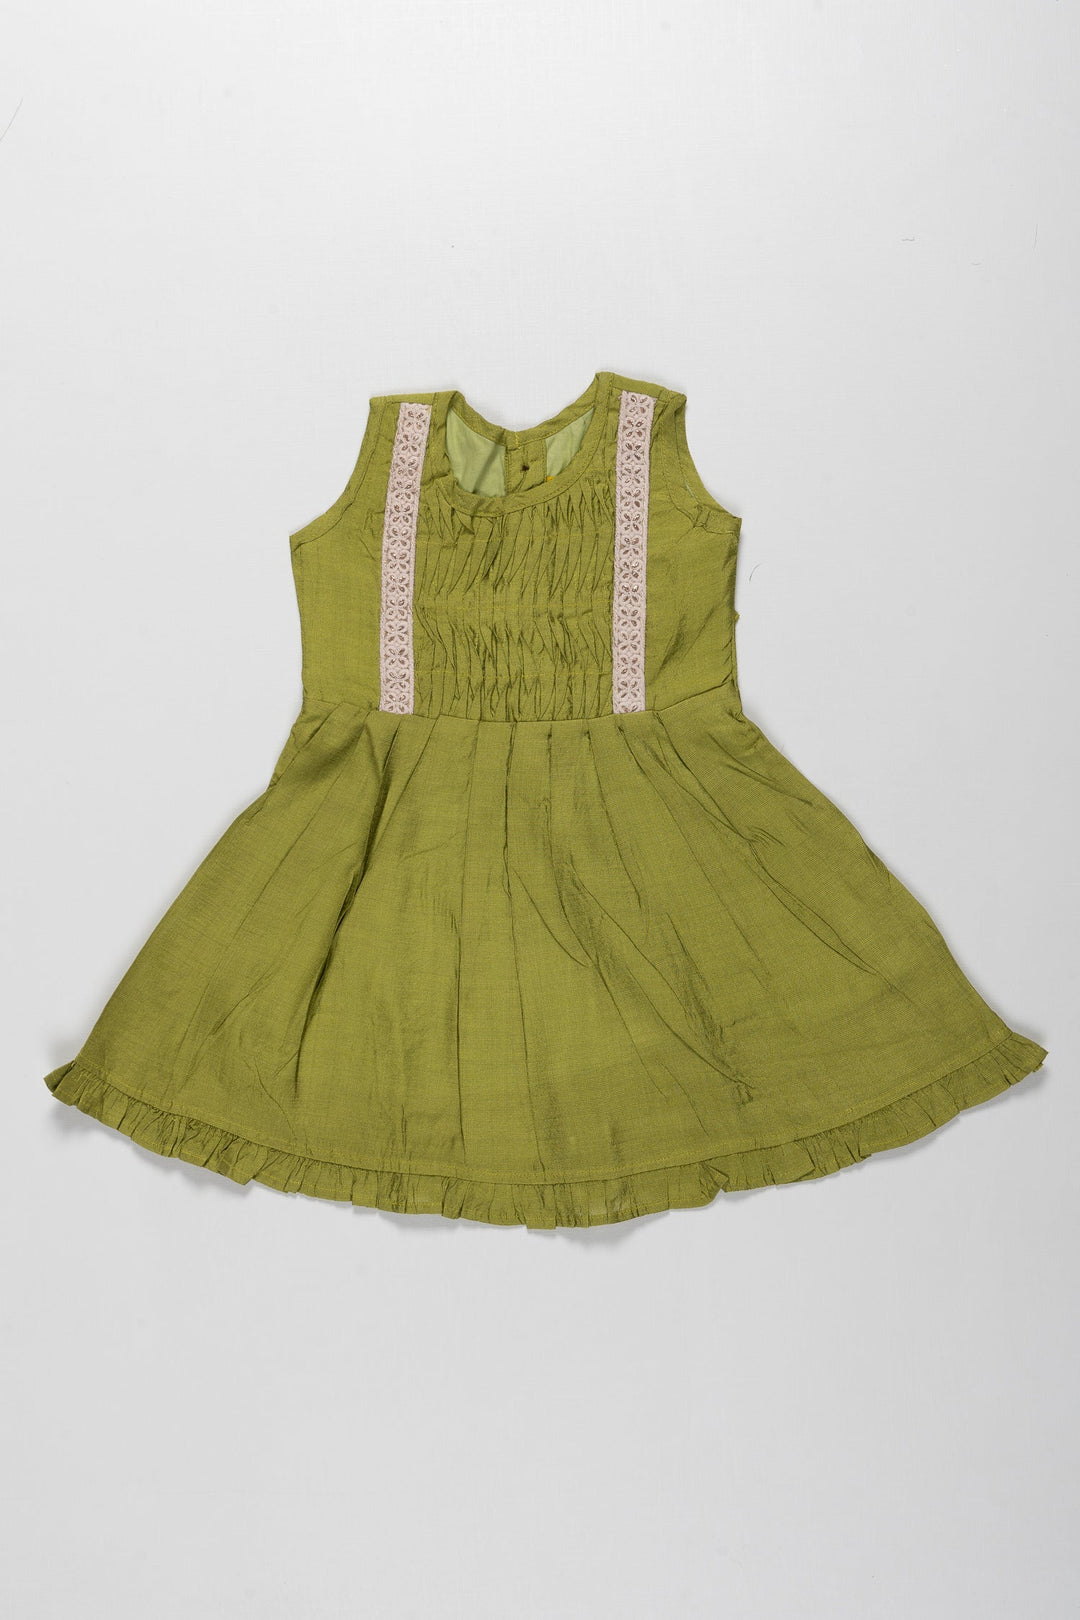 The Nesavu Girls Cotton Frock Girls' Lime Green Pleated Cotton Sundress with Lace Accents Nesavu 16 (1Y) / Green / Cotton GFC1264A-16 Casual Lace-Trimmed Green Sundress for Girls | Everyday Summer Chic | The Nesavu